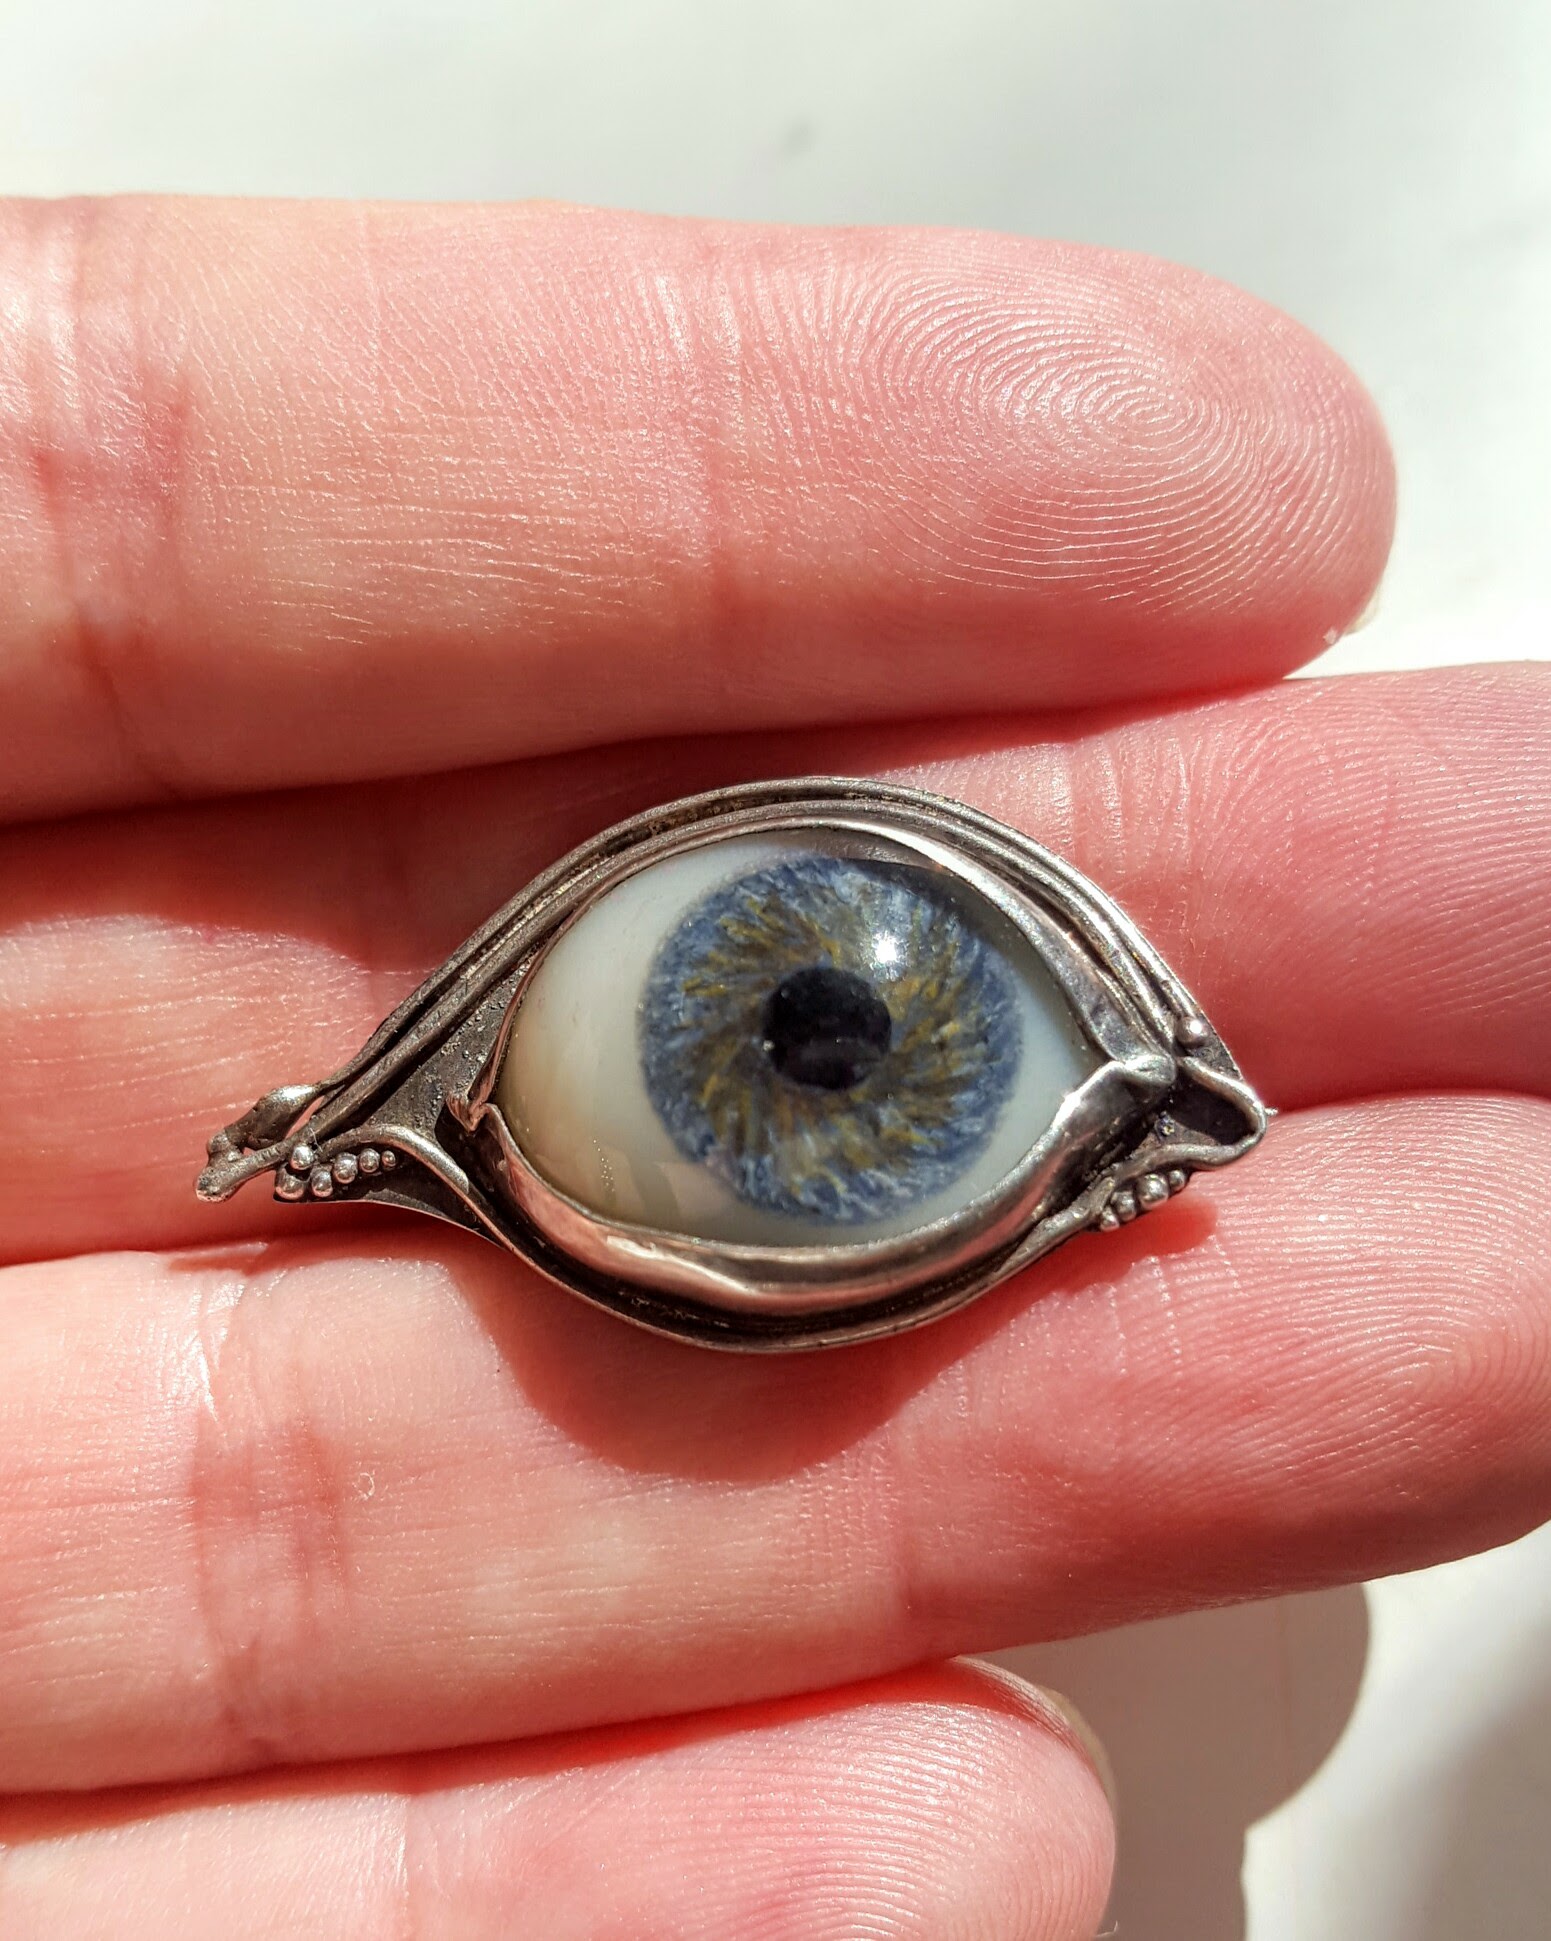 It would match with m'eye brooch. https://www.collectorsweekly.com/st....